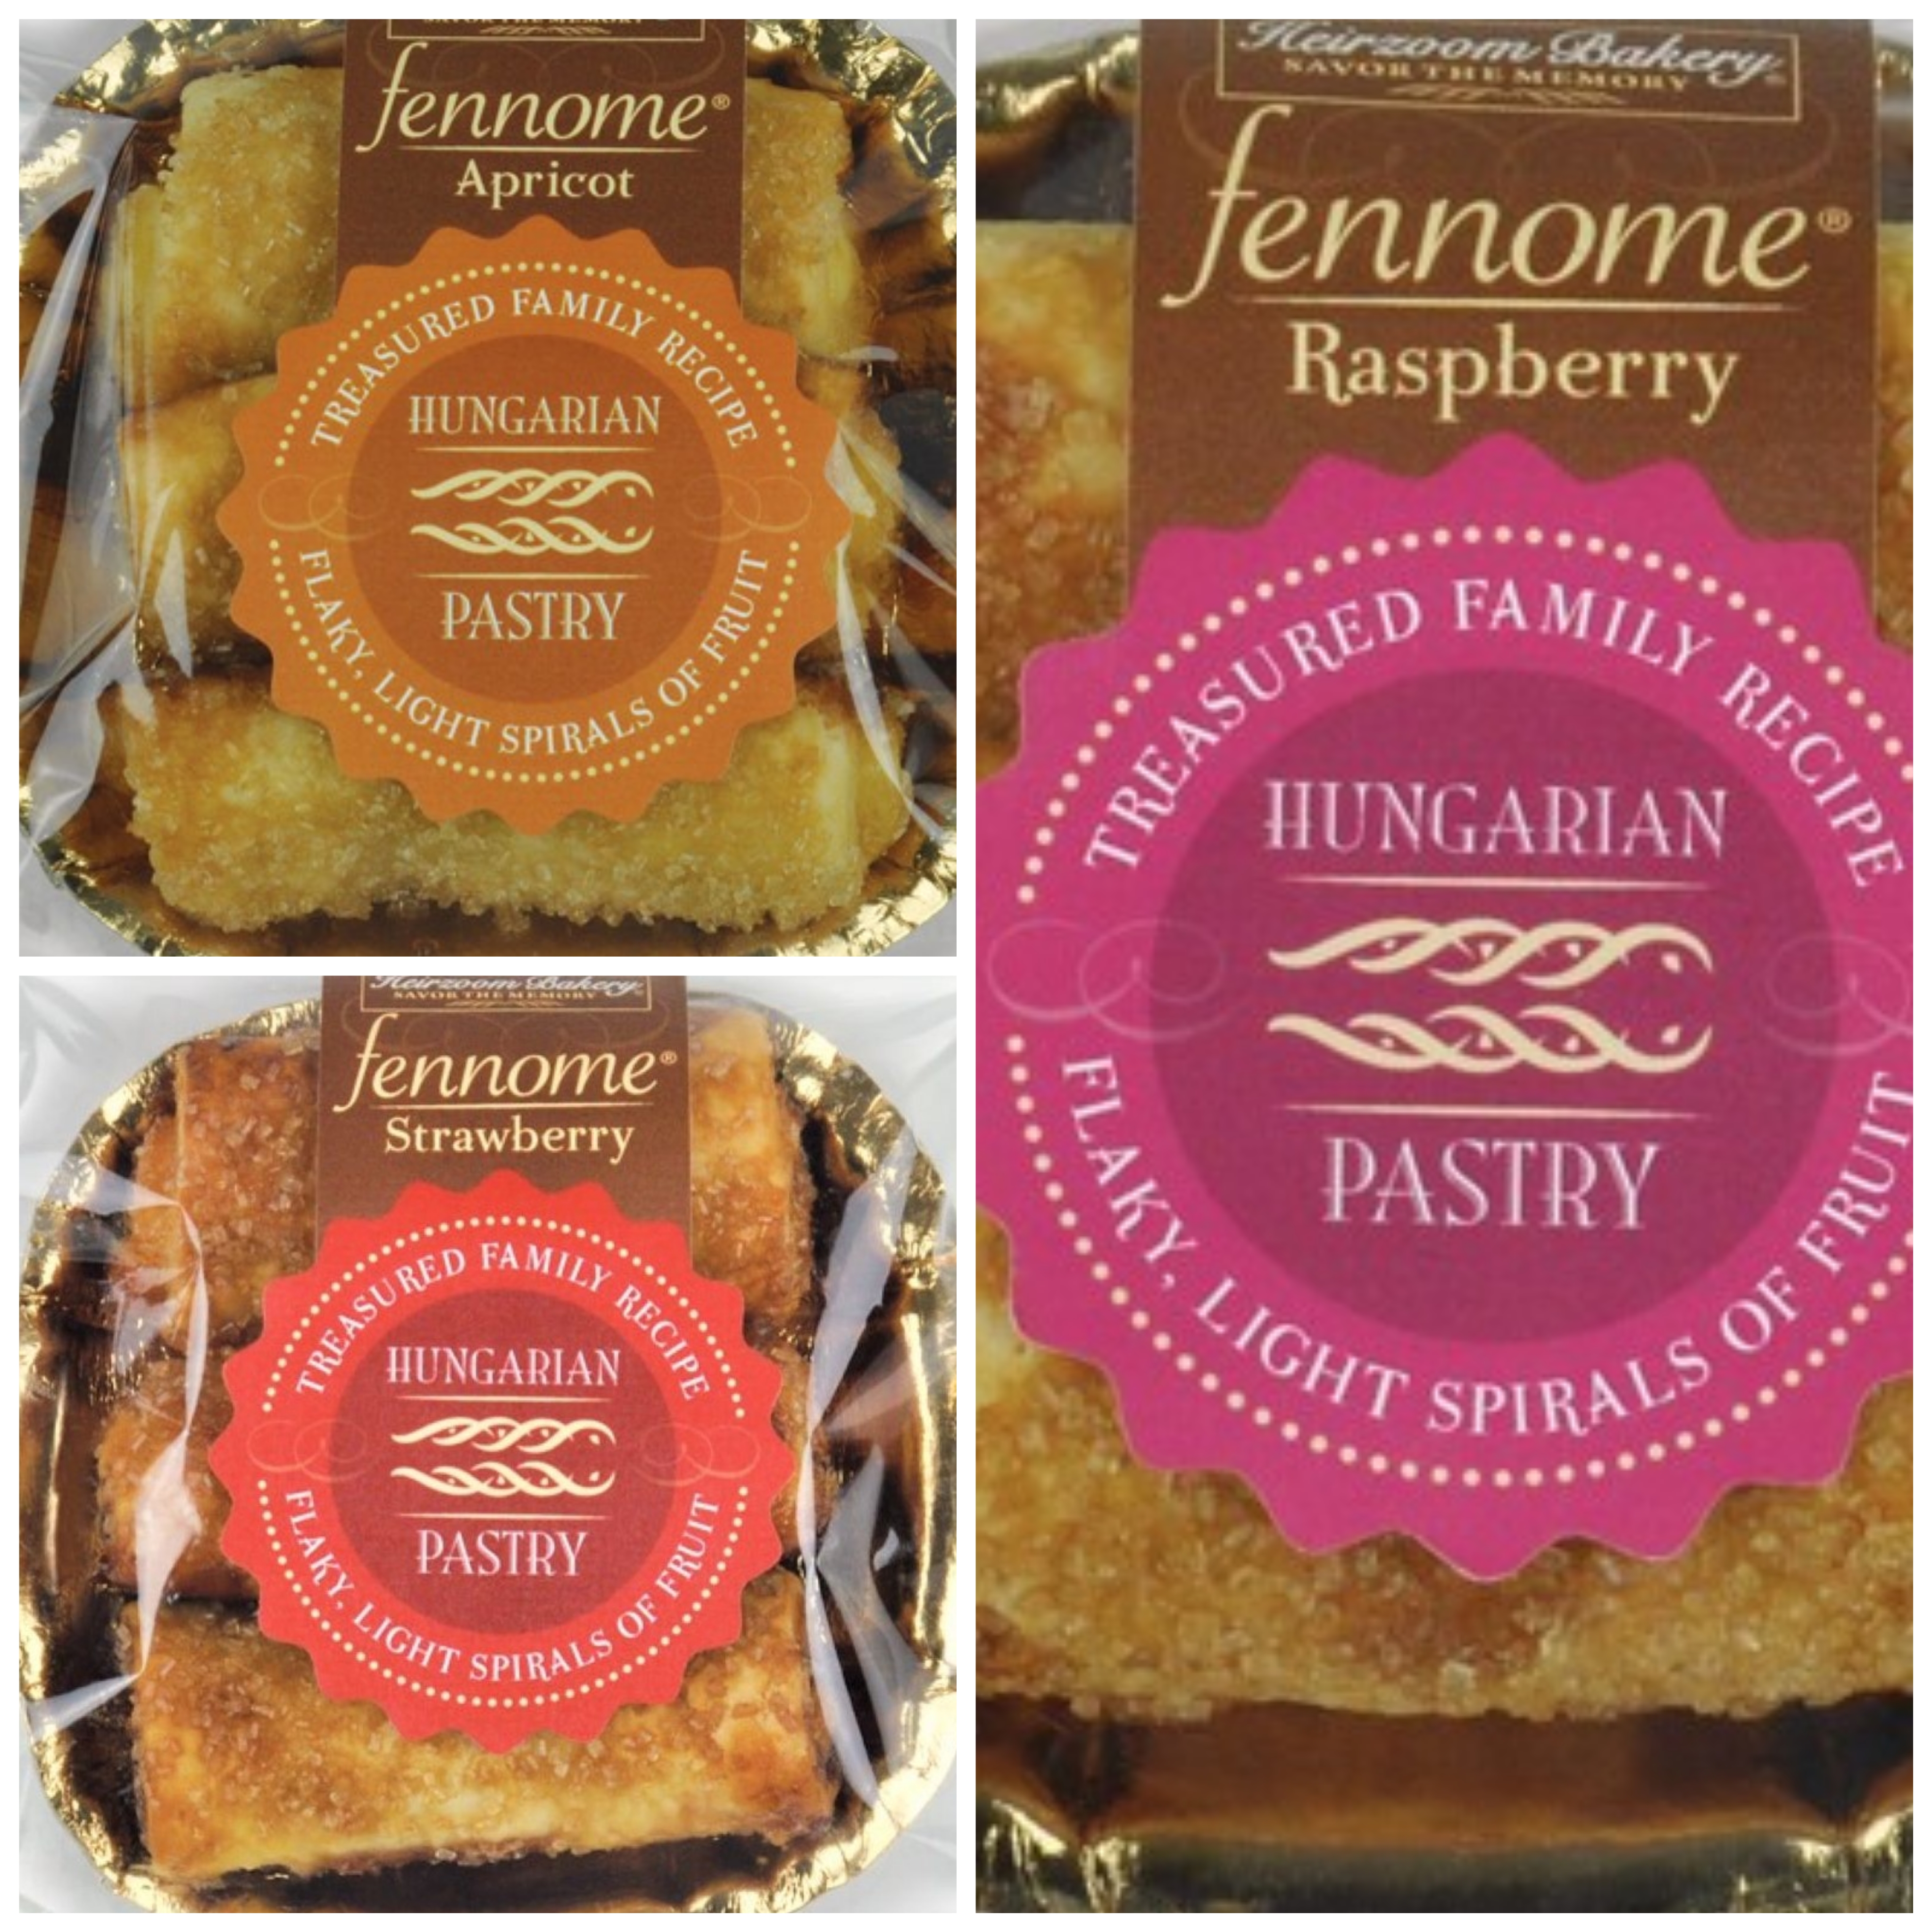 sampler kit of pastries: strawberry, raspberry, and apricot